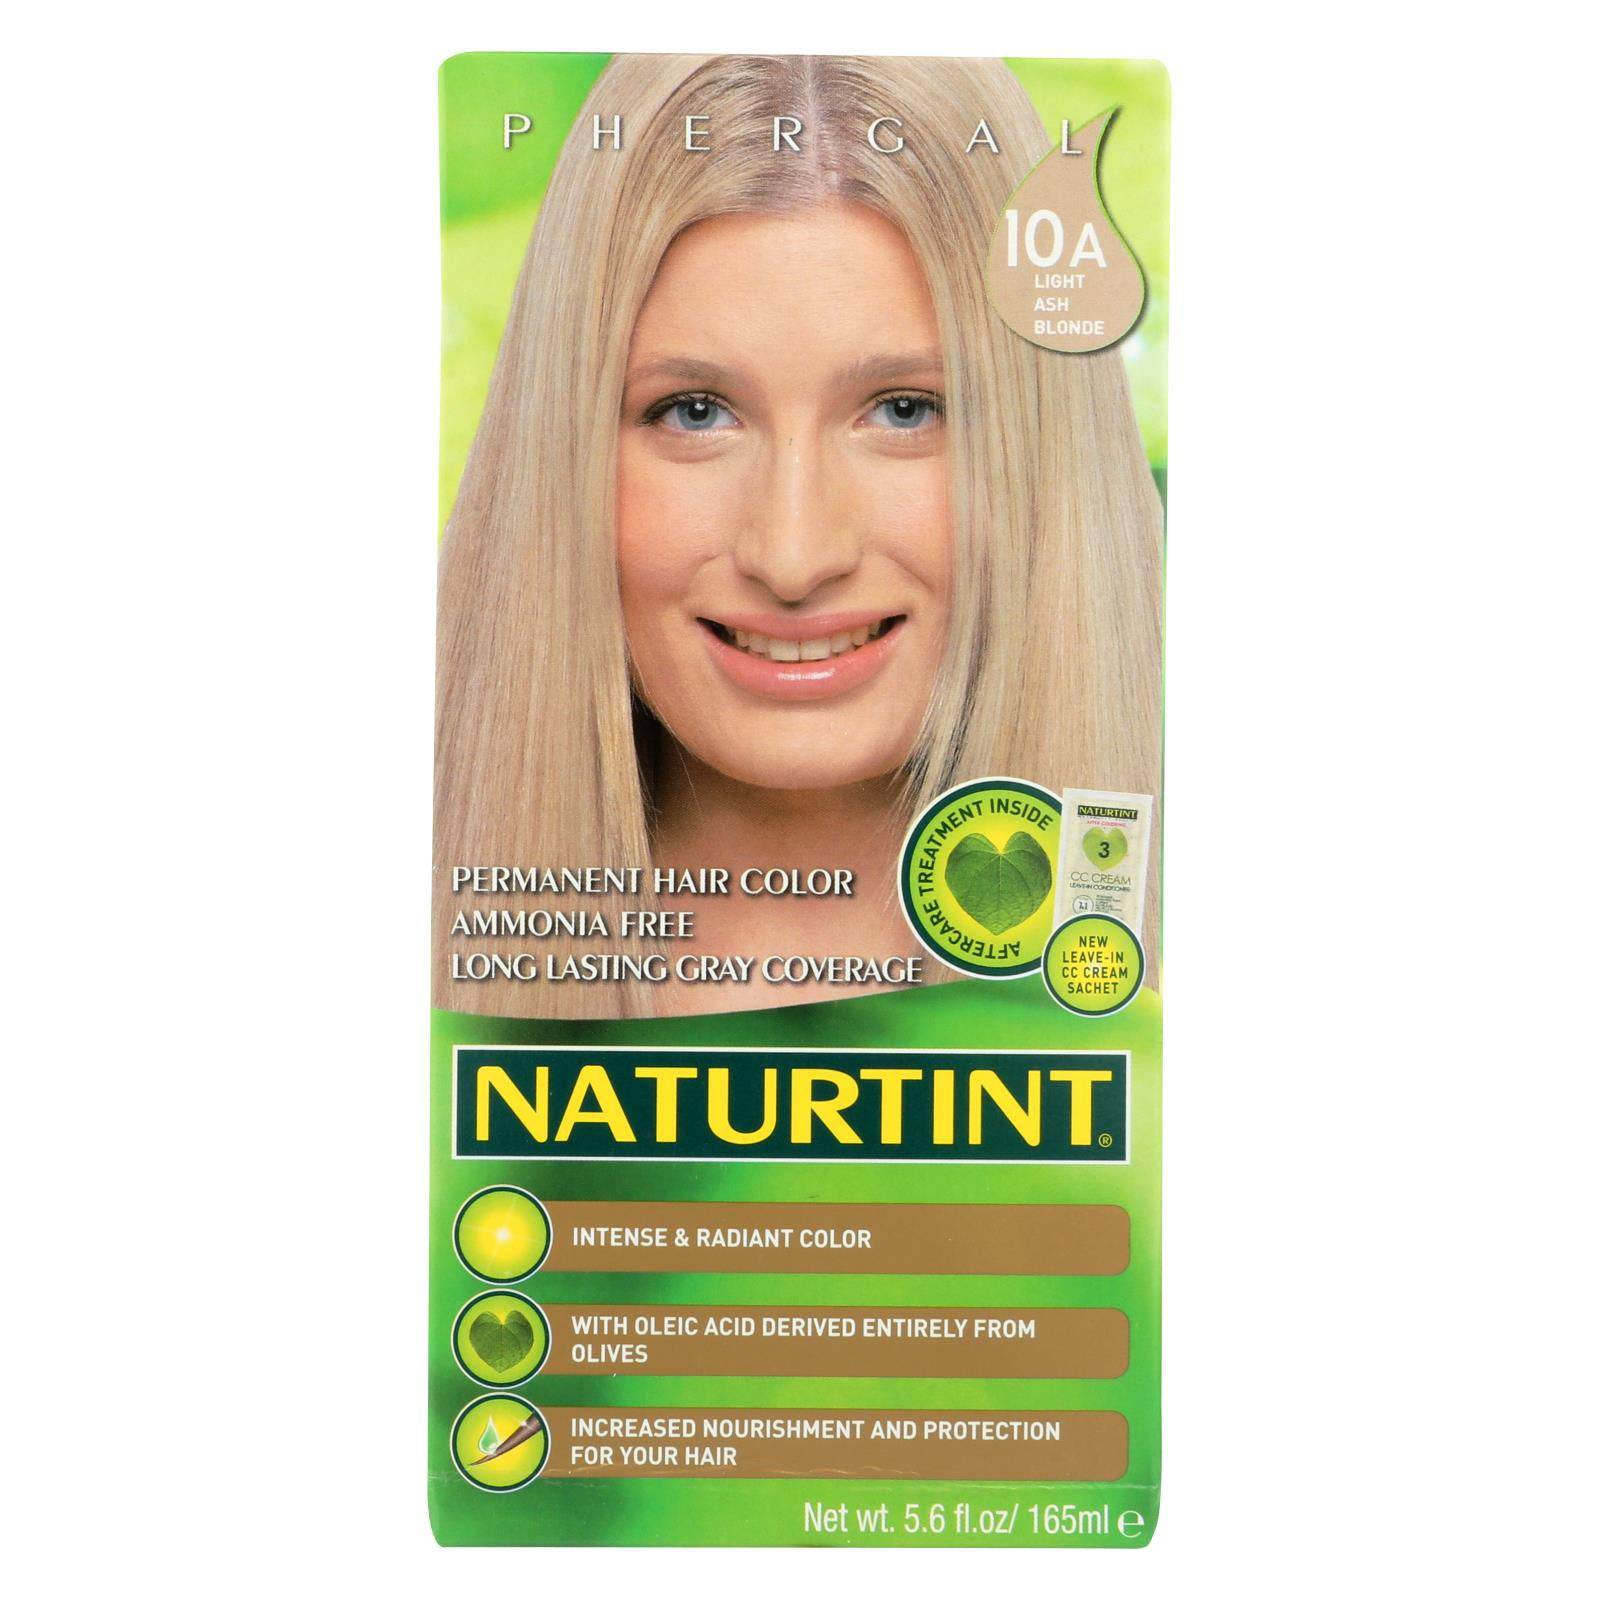 Buy Naturtint Hair Color - Permanent - 10a - Light Ash Blonde - 5.28 Oz  at OnlyNaturals.us